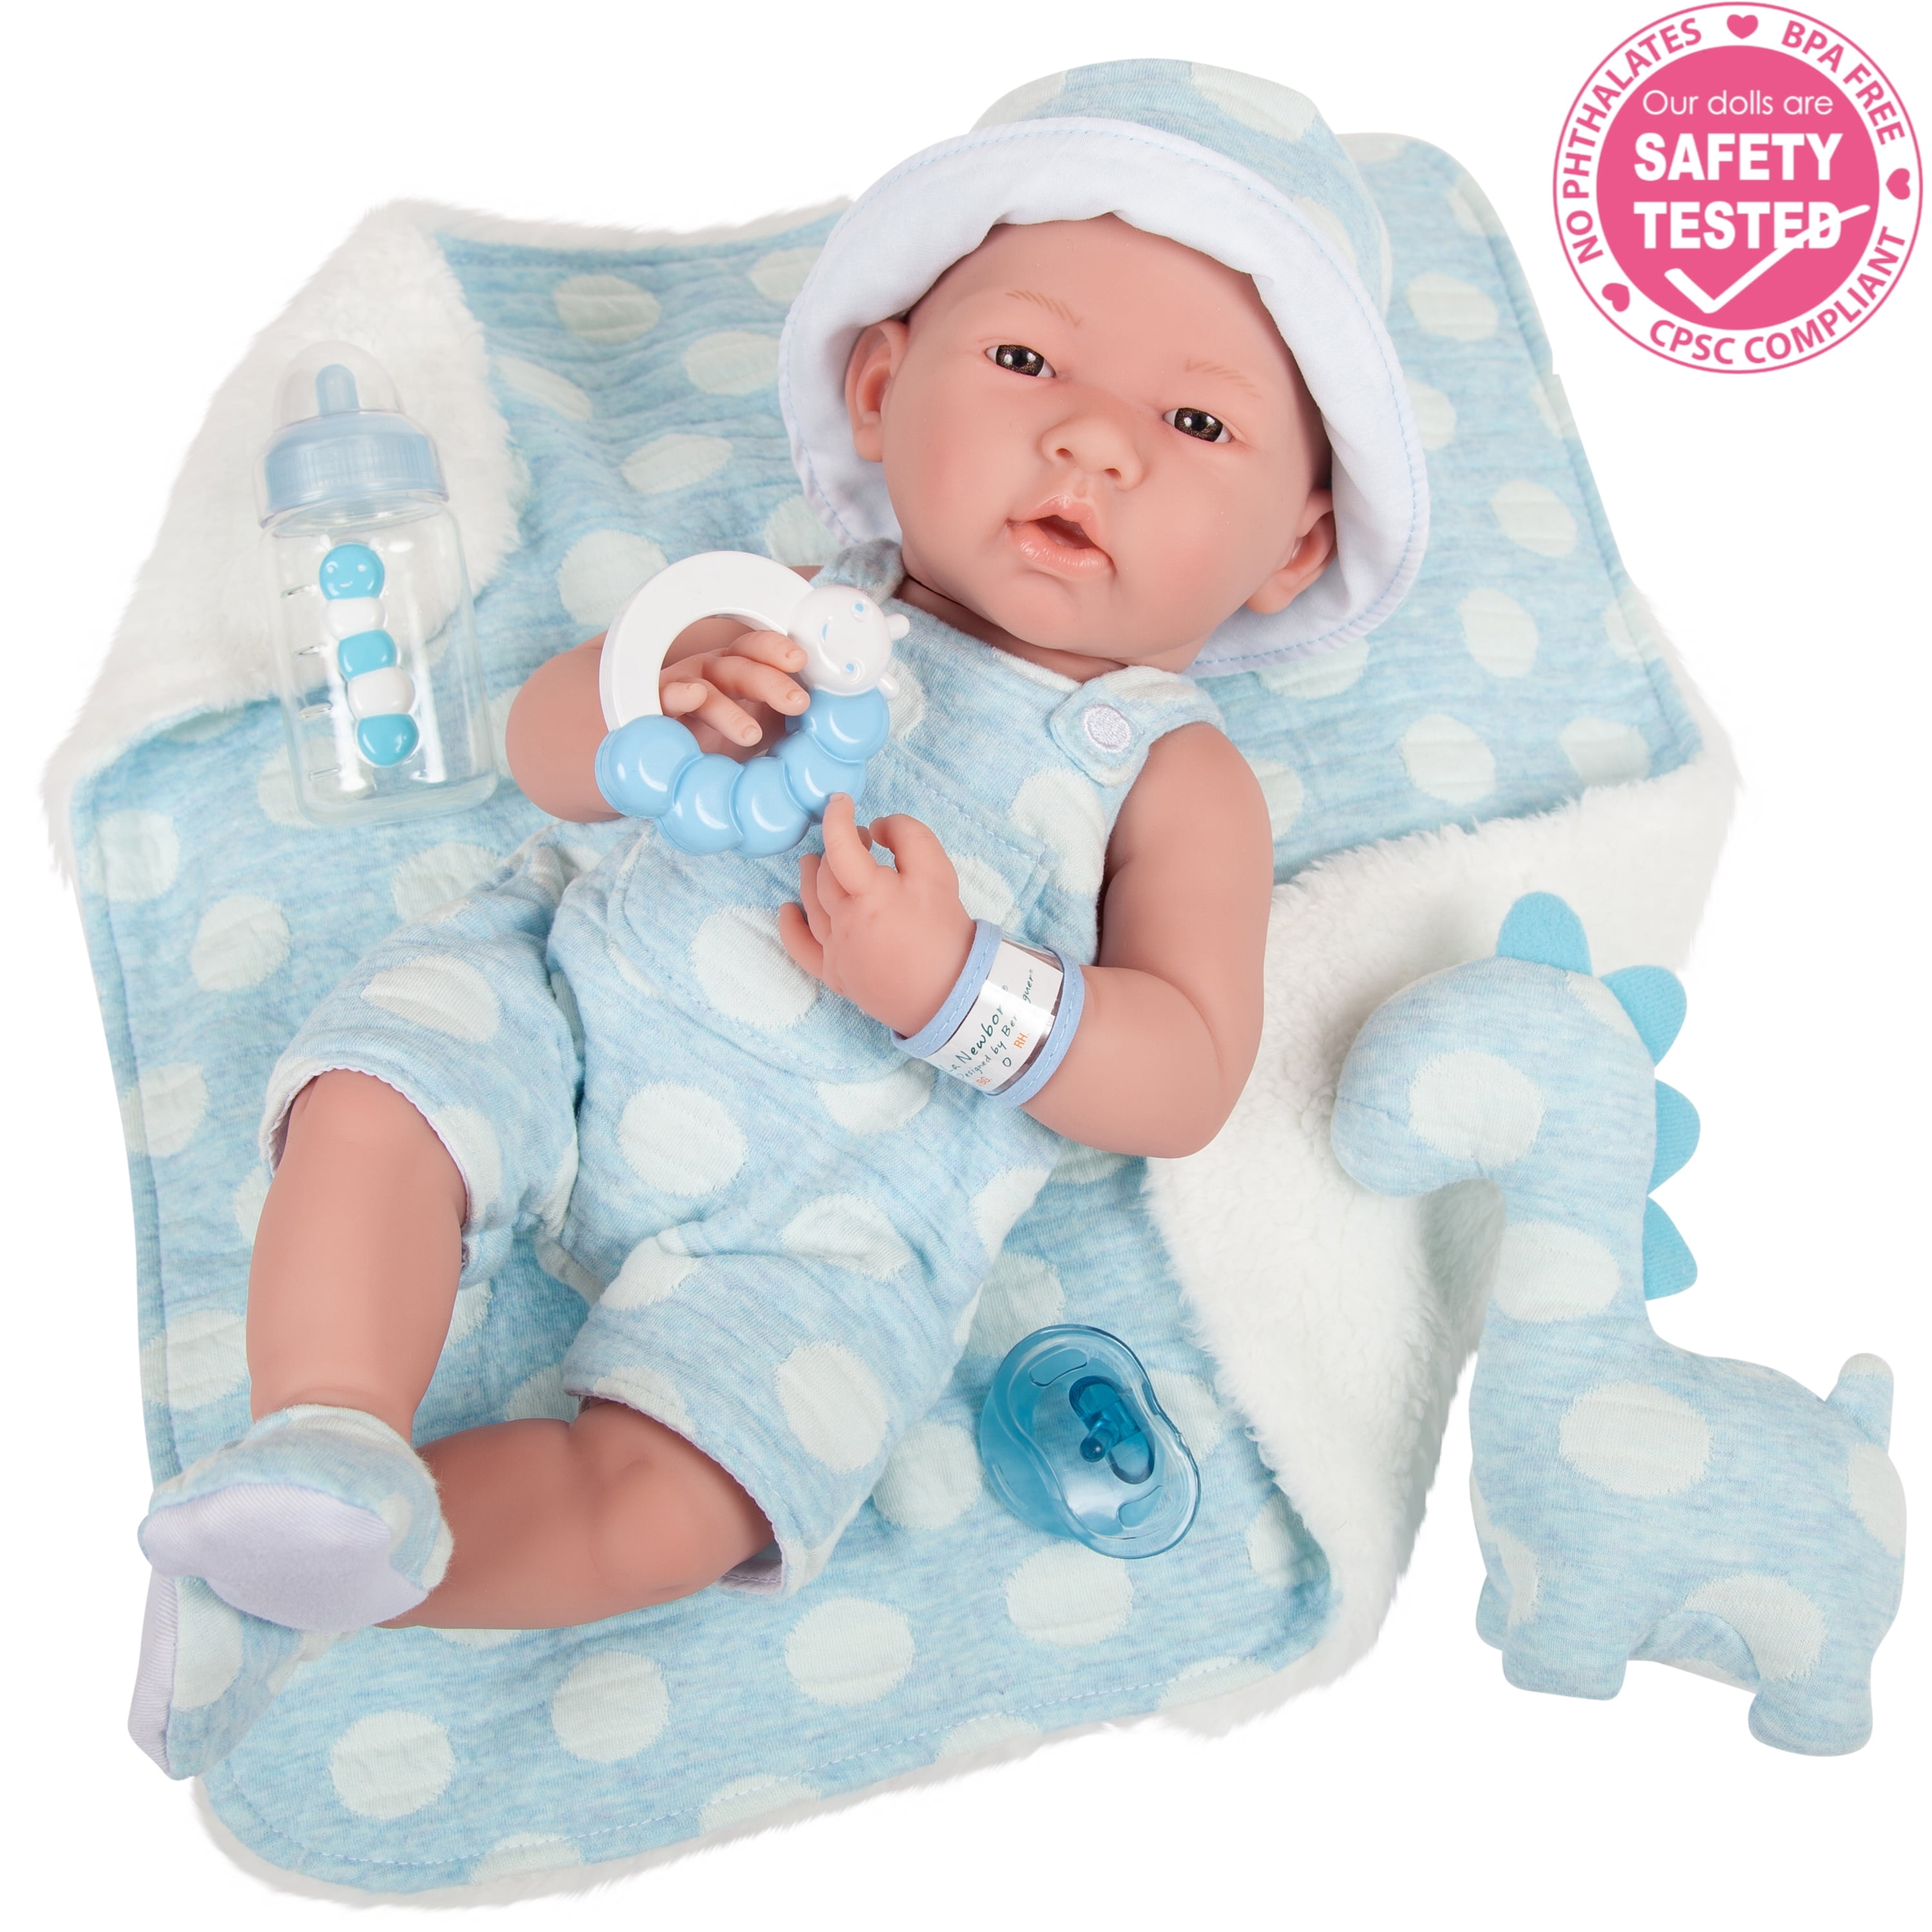 Blue Dotted Sleeping Bag For 10-11" Reborn Doll Babies Doll Supplies Gifts 